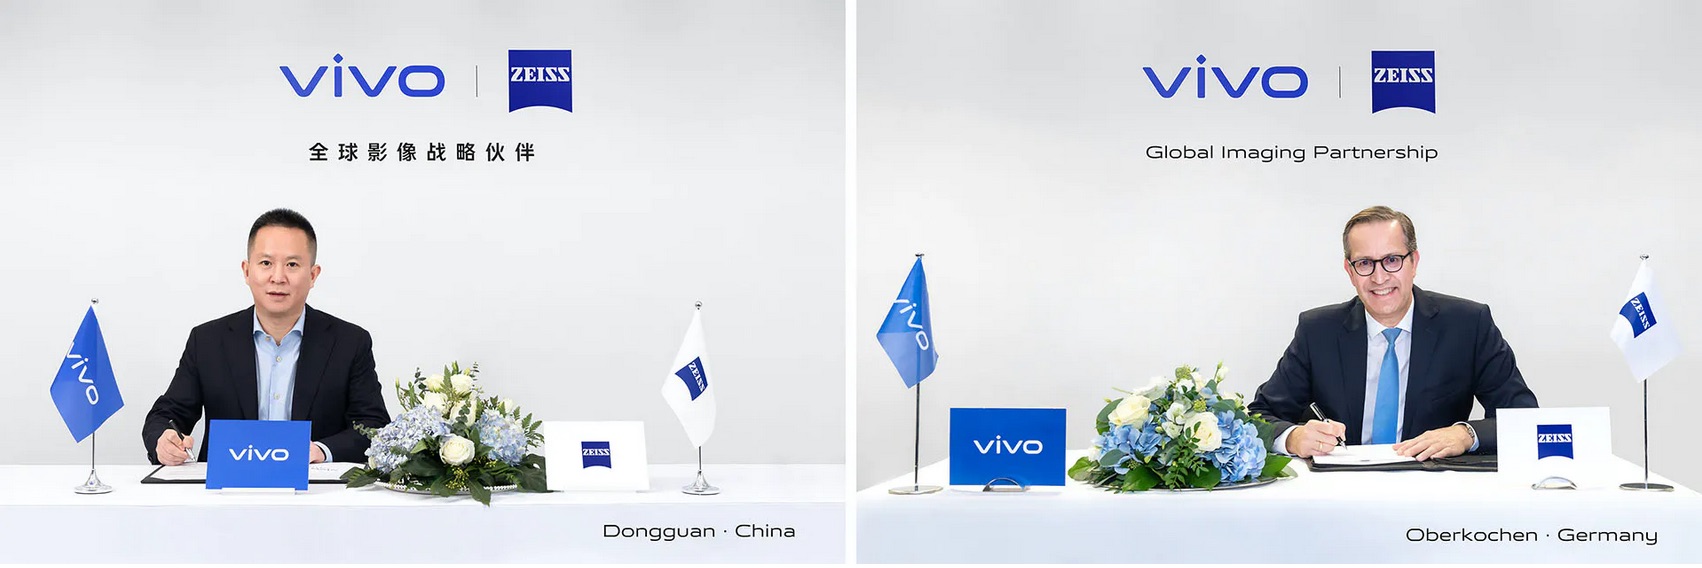 vivo and ZEISS Enter Global Partnership for Mobile Imaging | WebWire